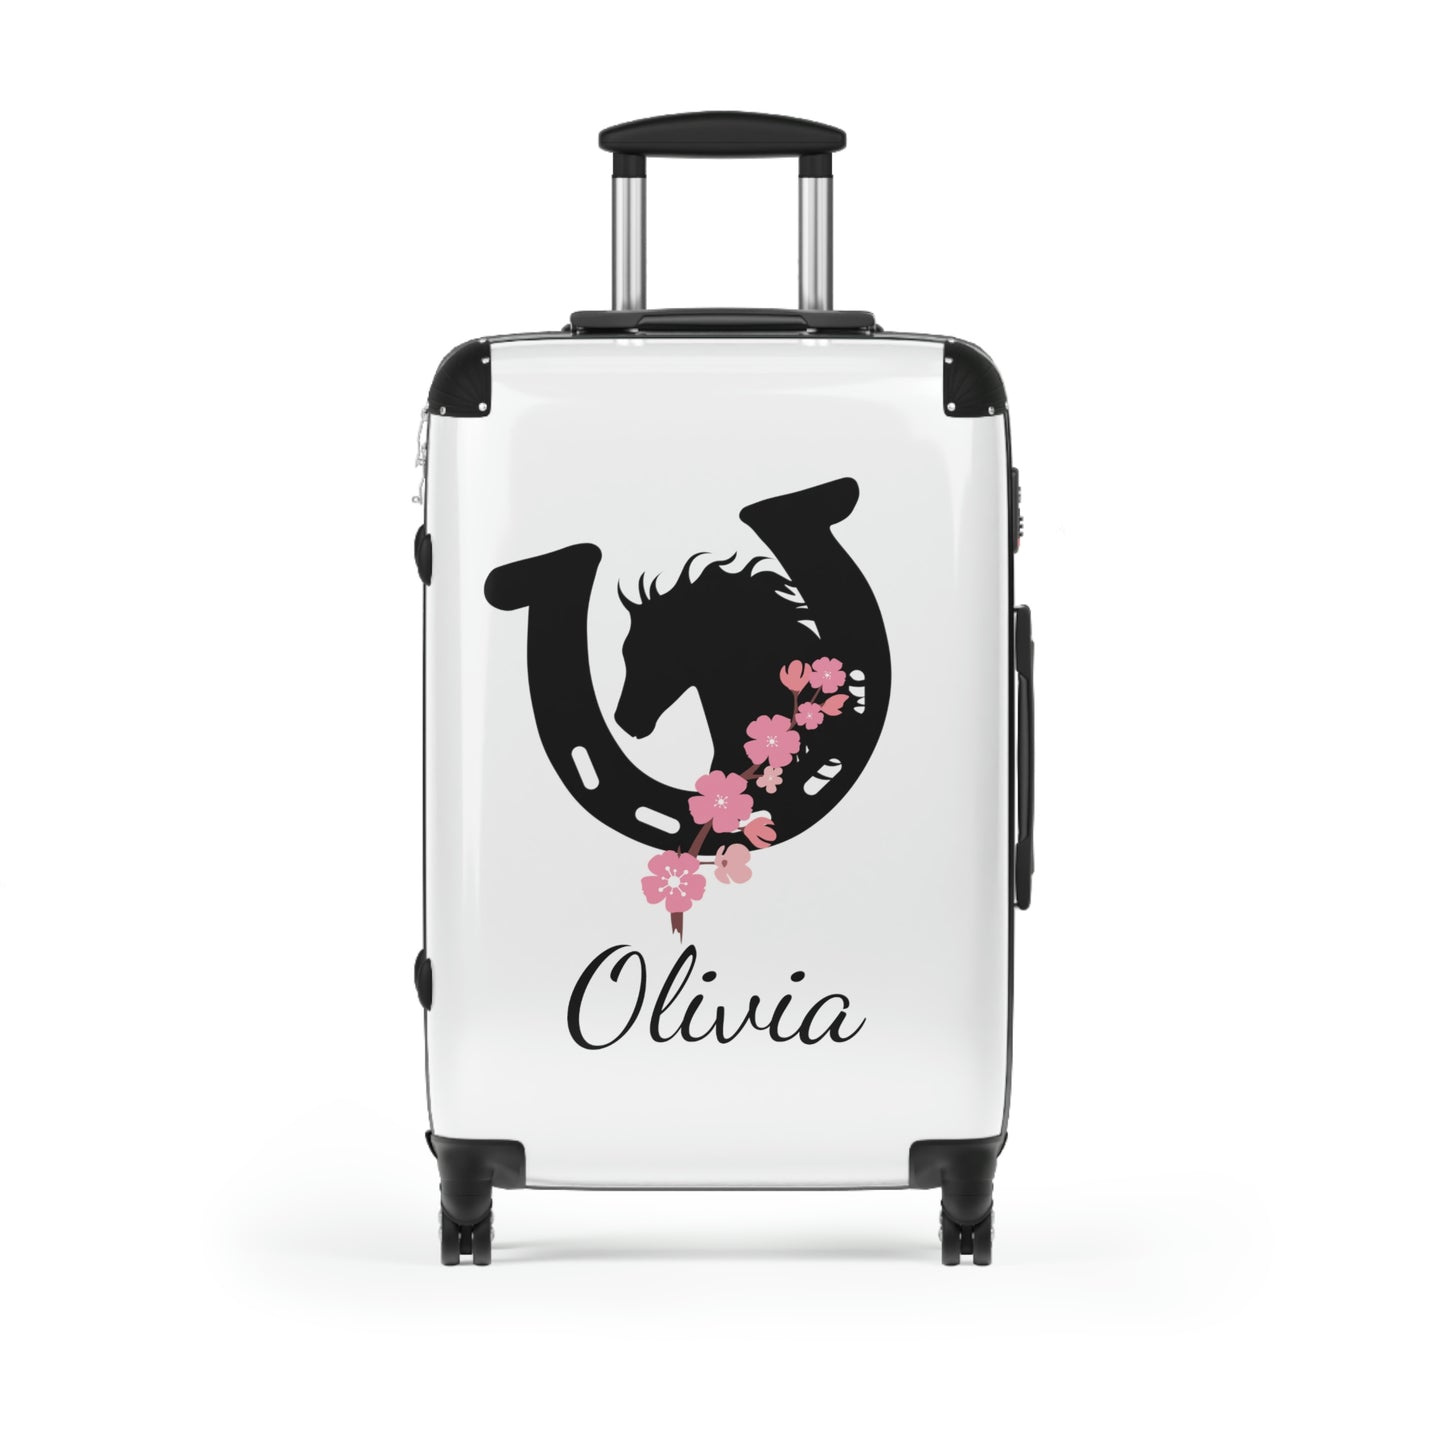 Personalized Luggage / Girl's Horse Print Hard Covered Suitcase